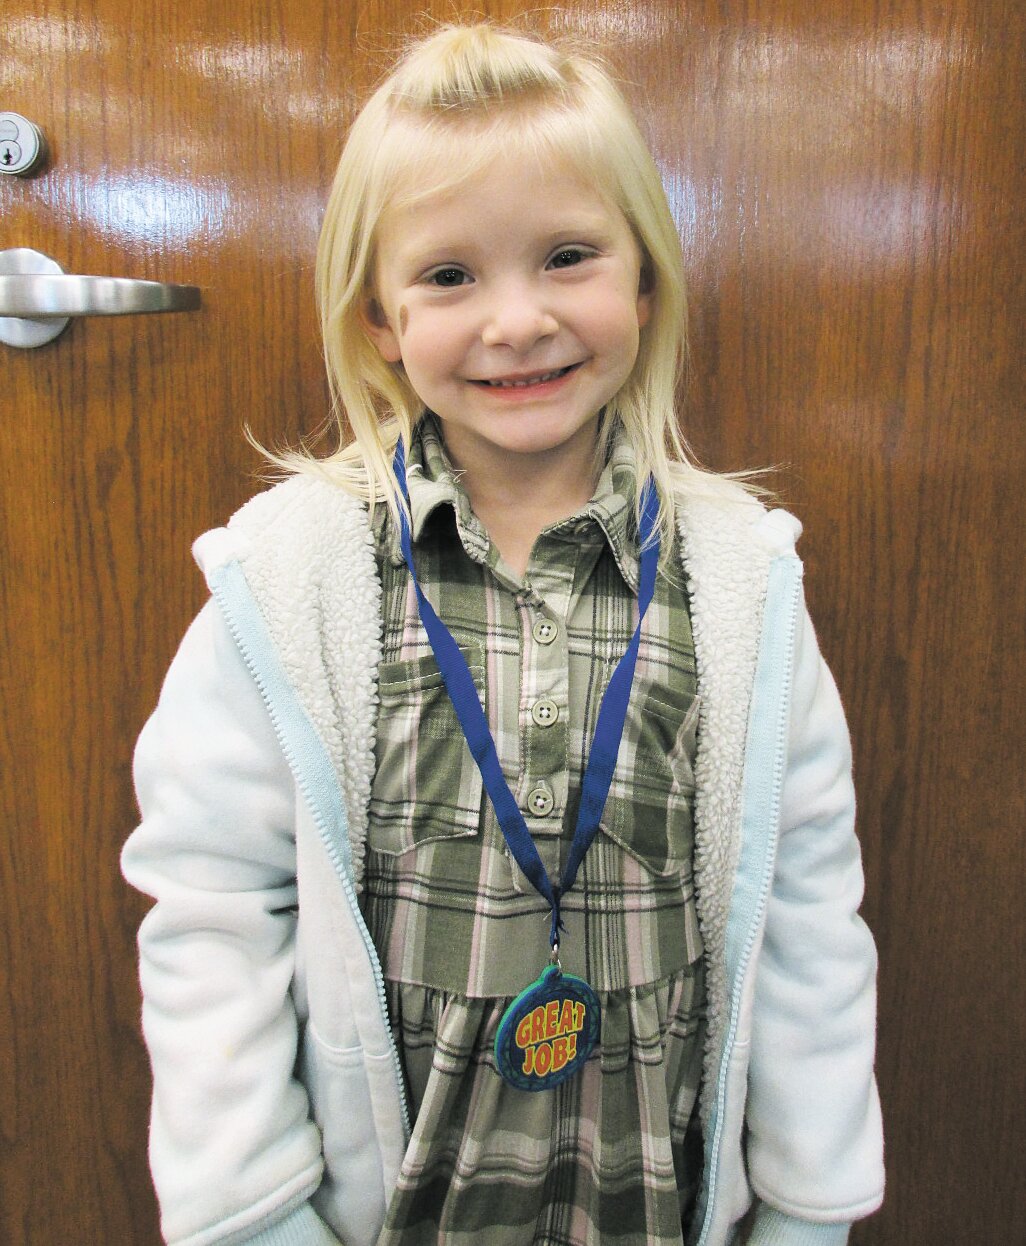 Kendall Harris, age 4 1/2, has completed the Crawfordsville District Public Library program, 1,000 Books Before Kindergarten. She is the daughter of Blake and Allison Harris. Kendall's favorite book is "Wacky Wednesday" by Theo LeSieg. Kendall loves to go to the library with her great grandfather.